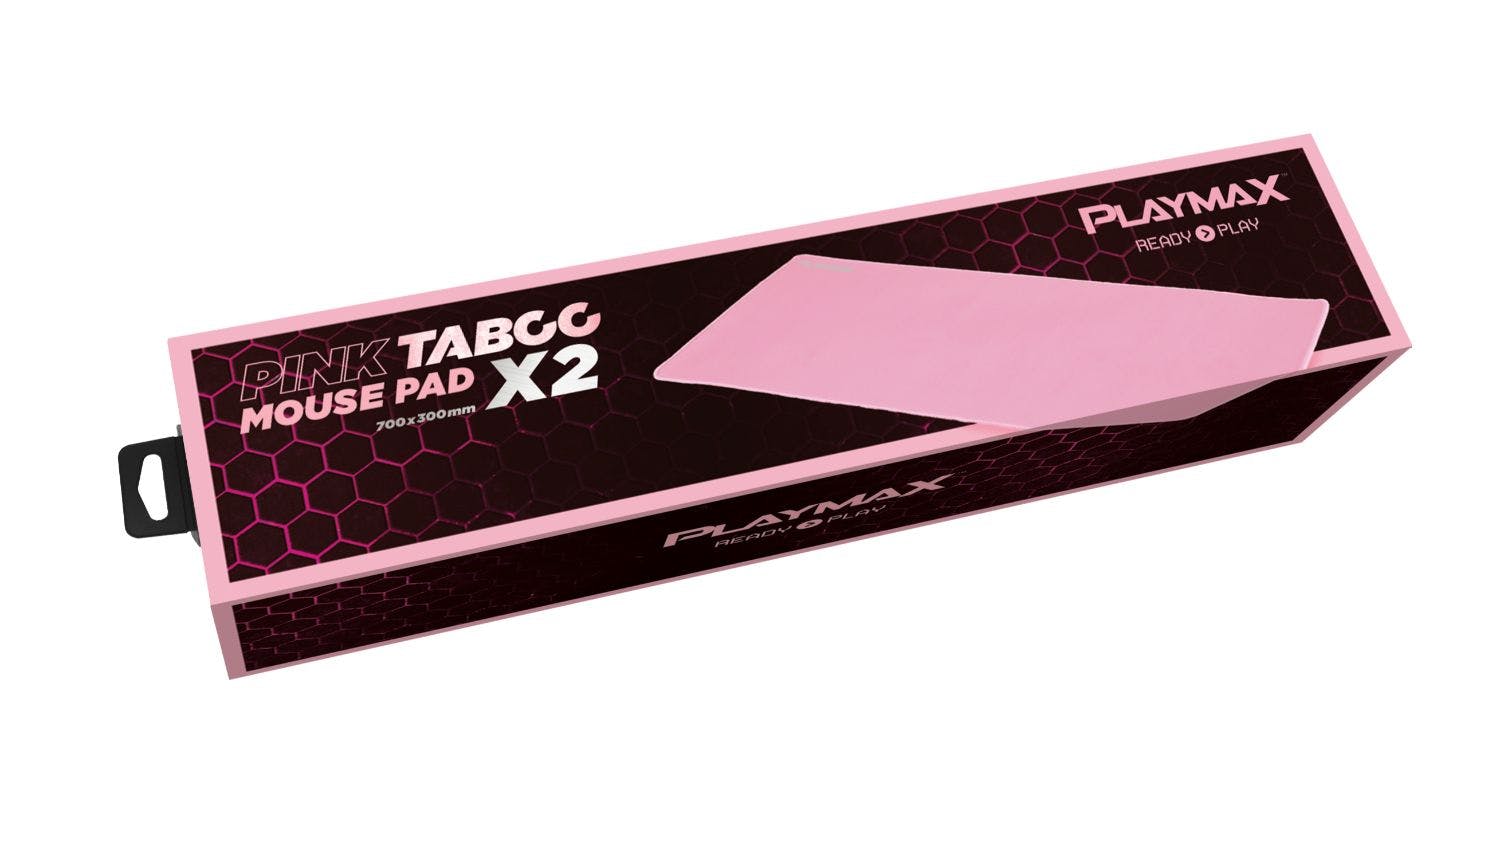 Playmax Pink Taboo Mouse Mat 70 x 30cm